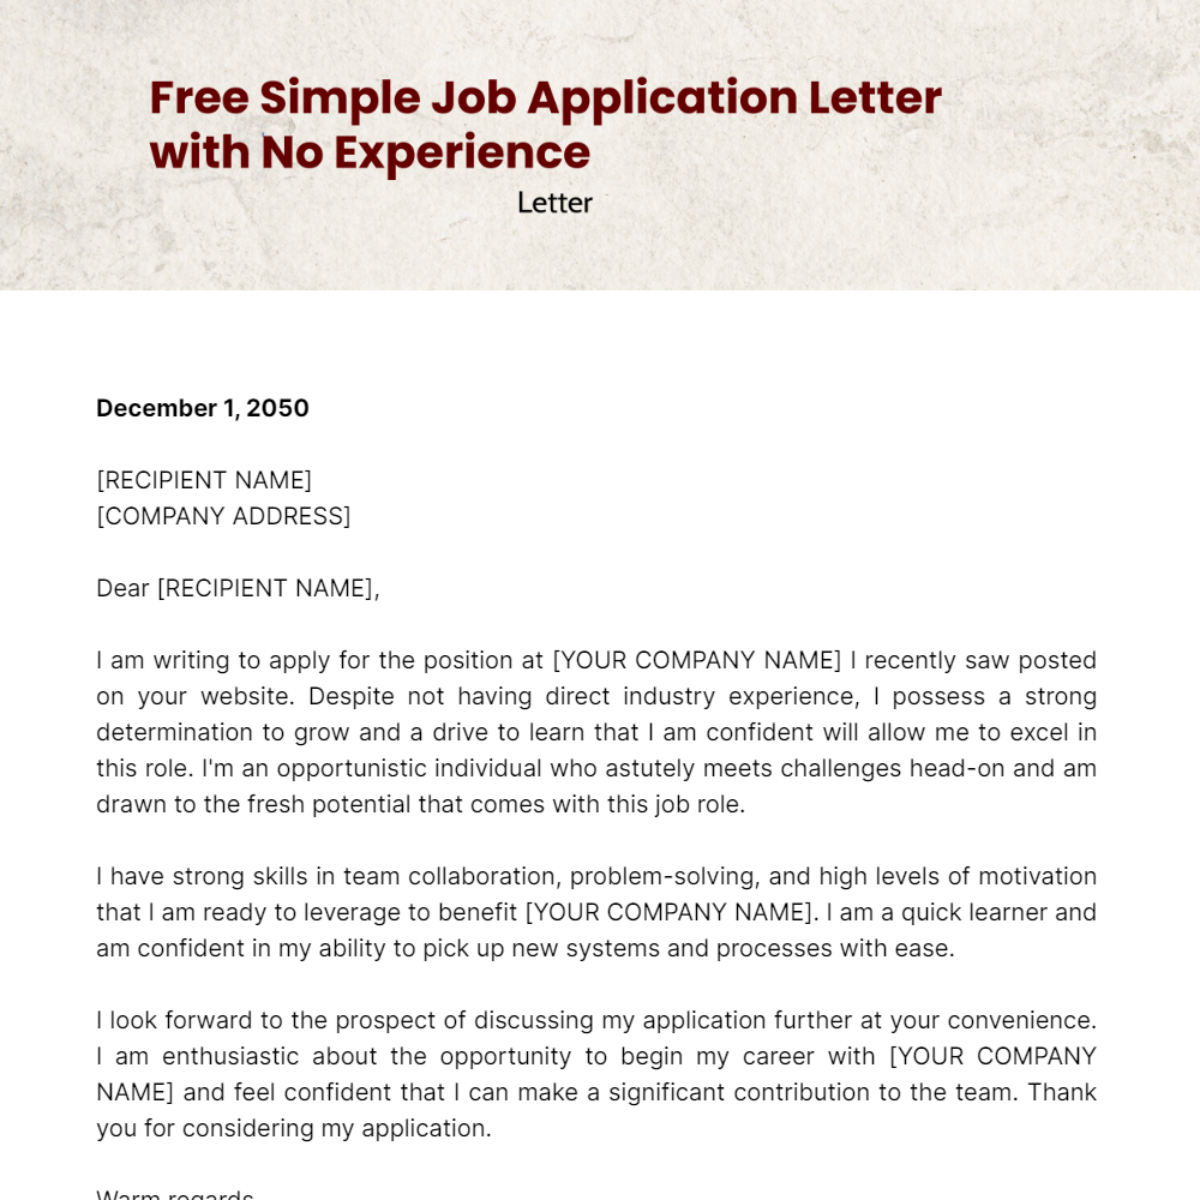 Simple Job Application Letter with No Experience Template